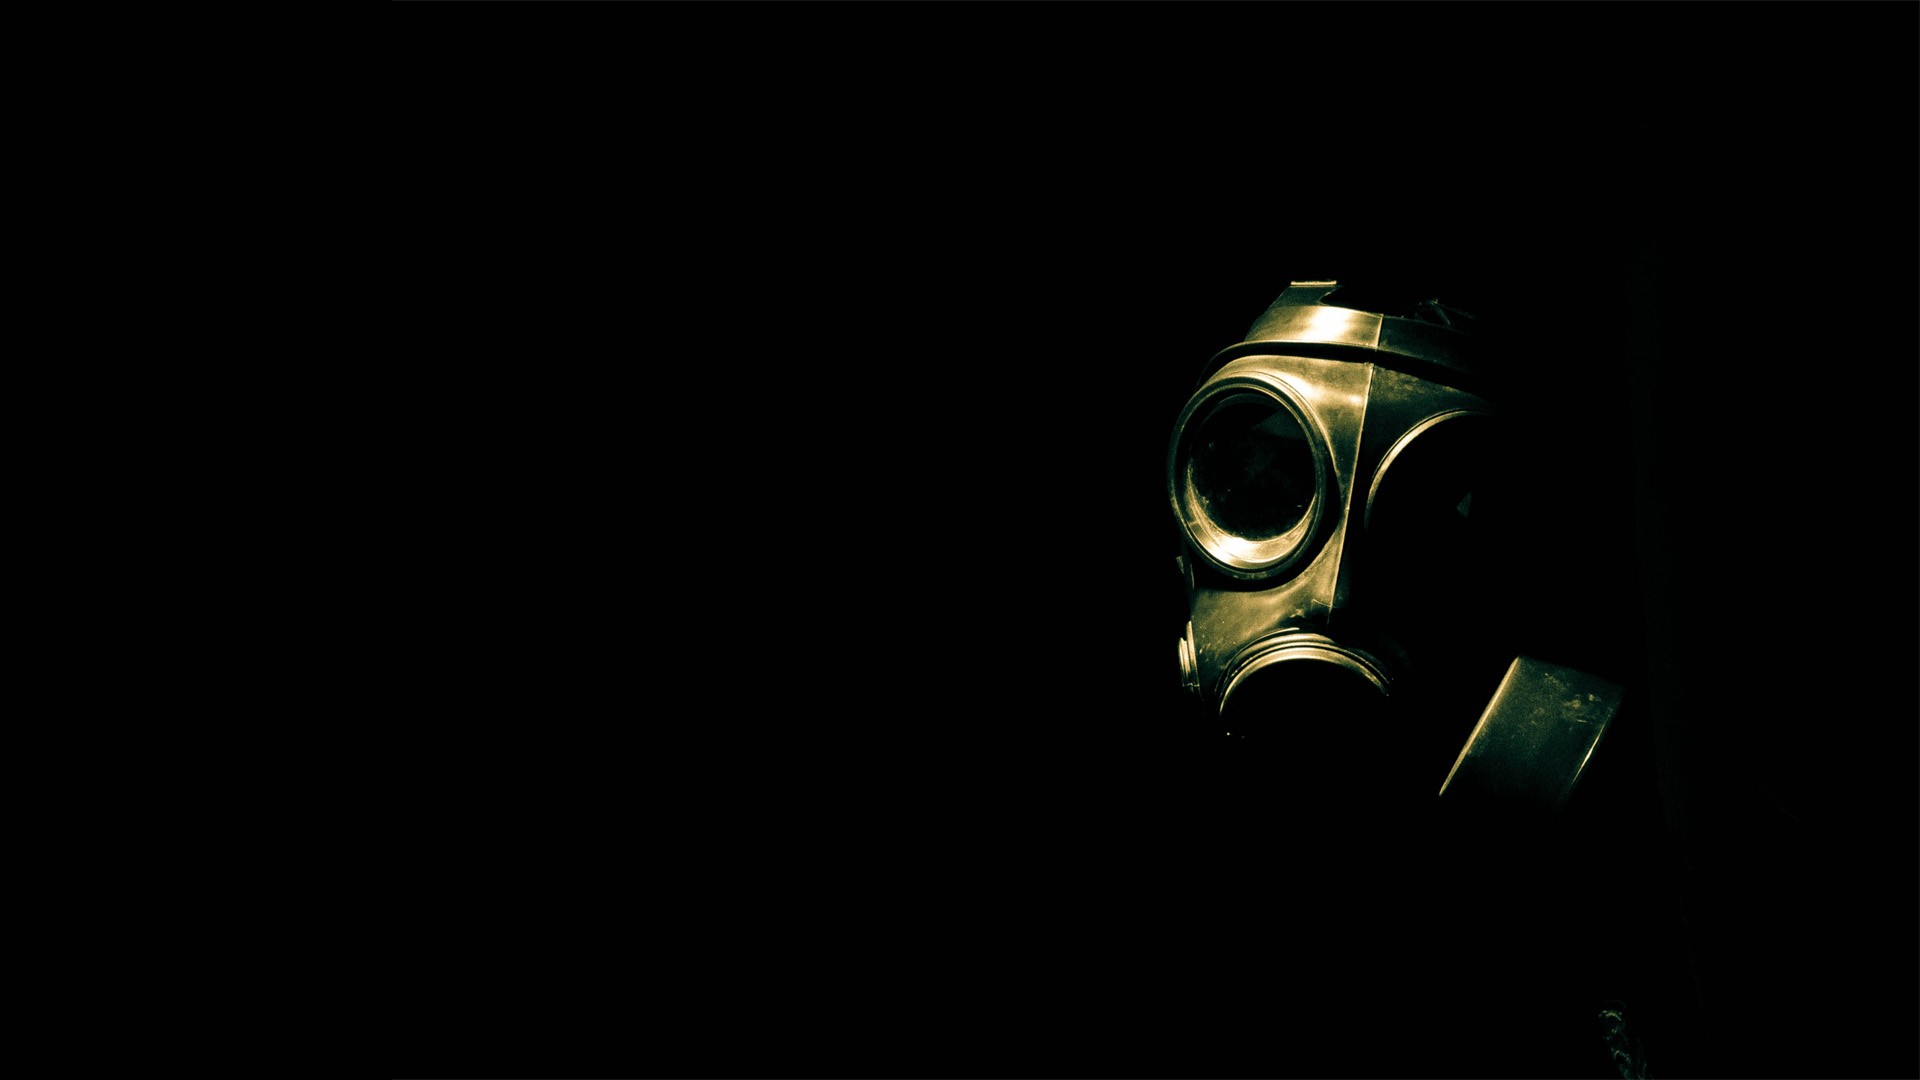 Displaying Image For Dubstep Gas Mask Wallpaper